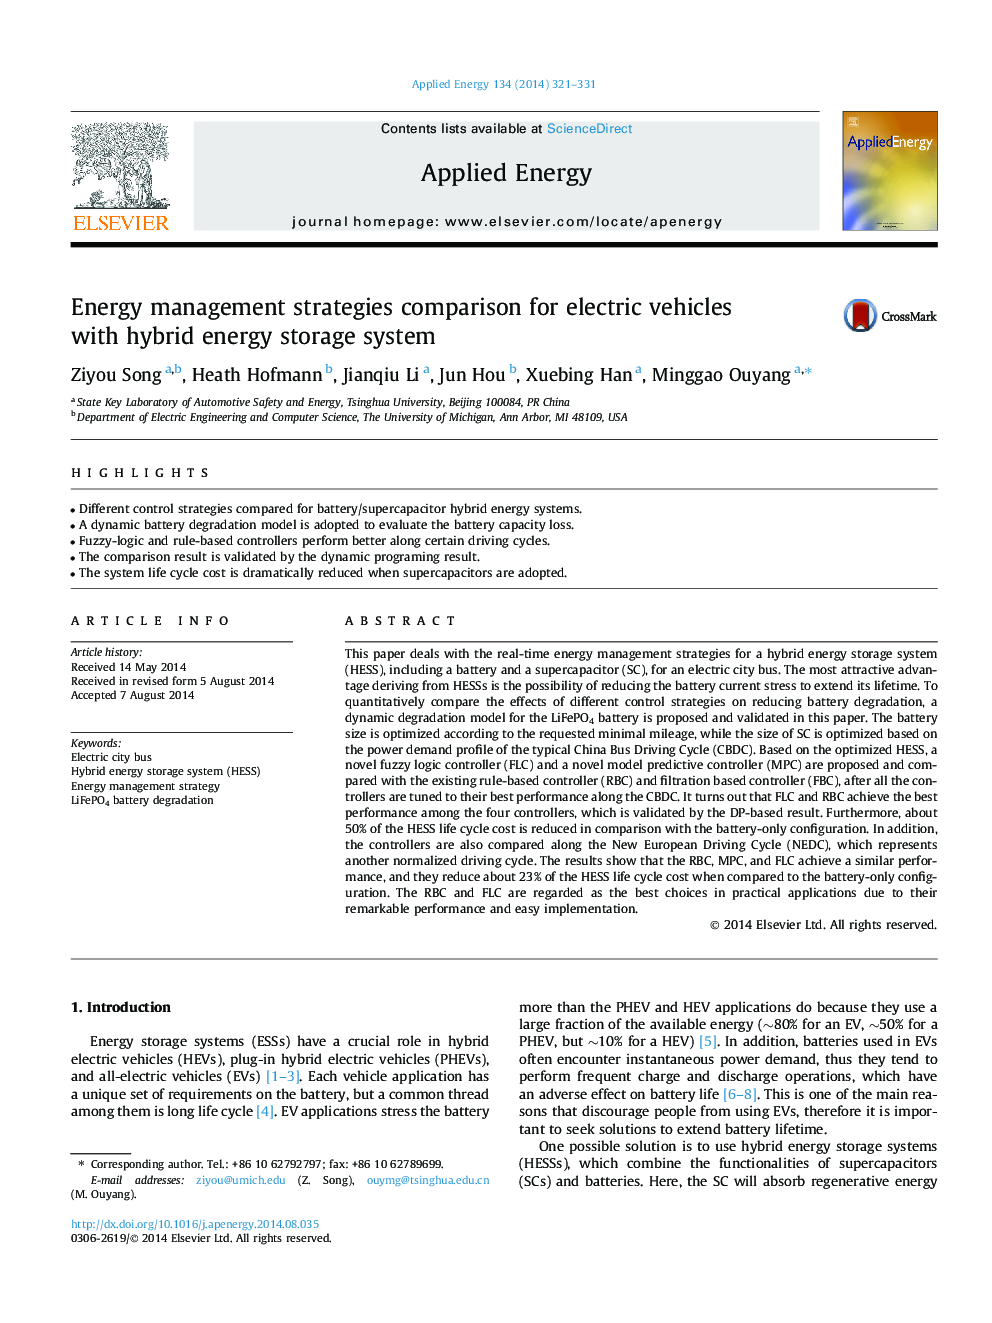 Energy management strategies comparison for electric vehicles with hybrid energy storage system